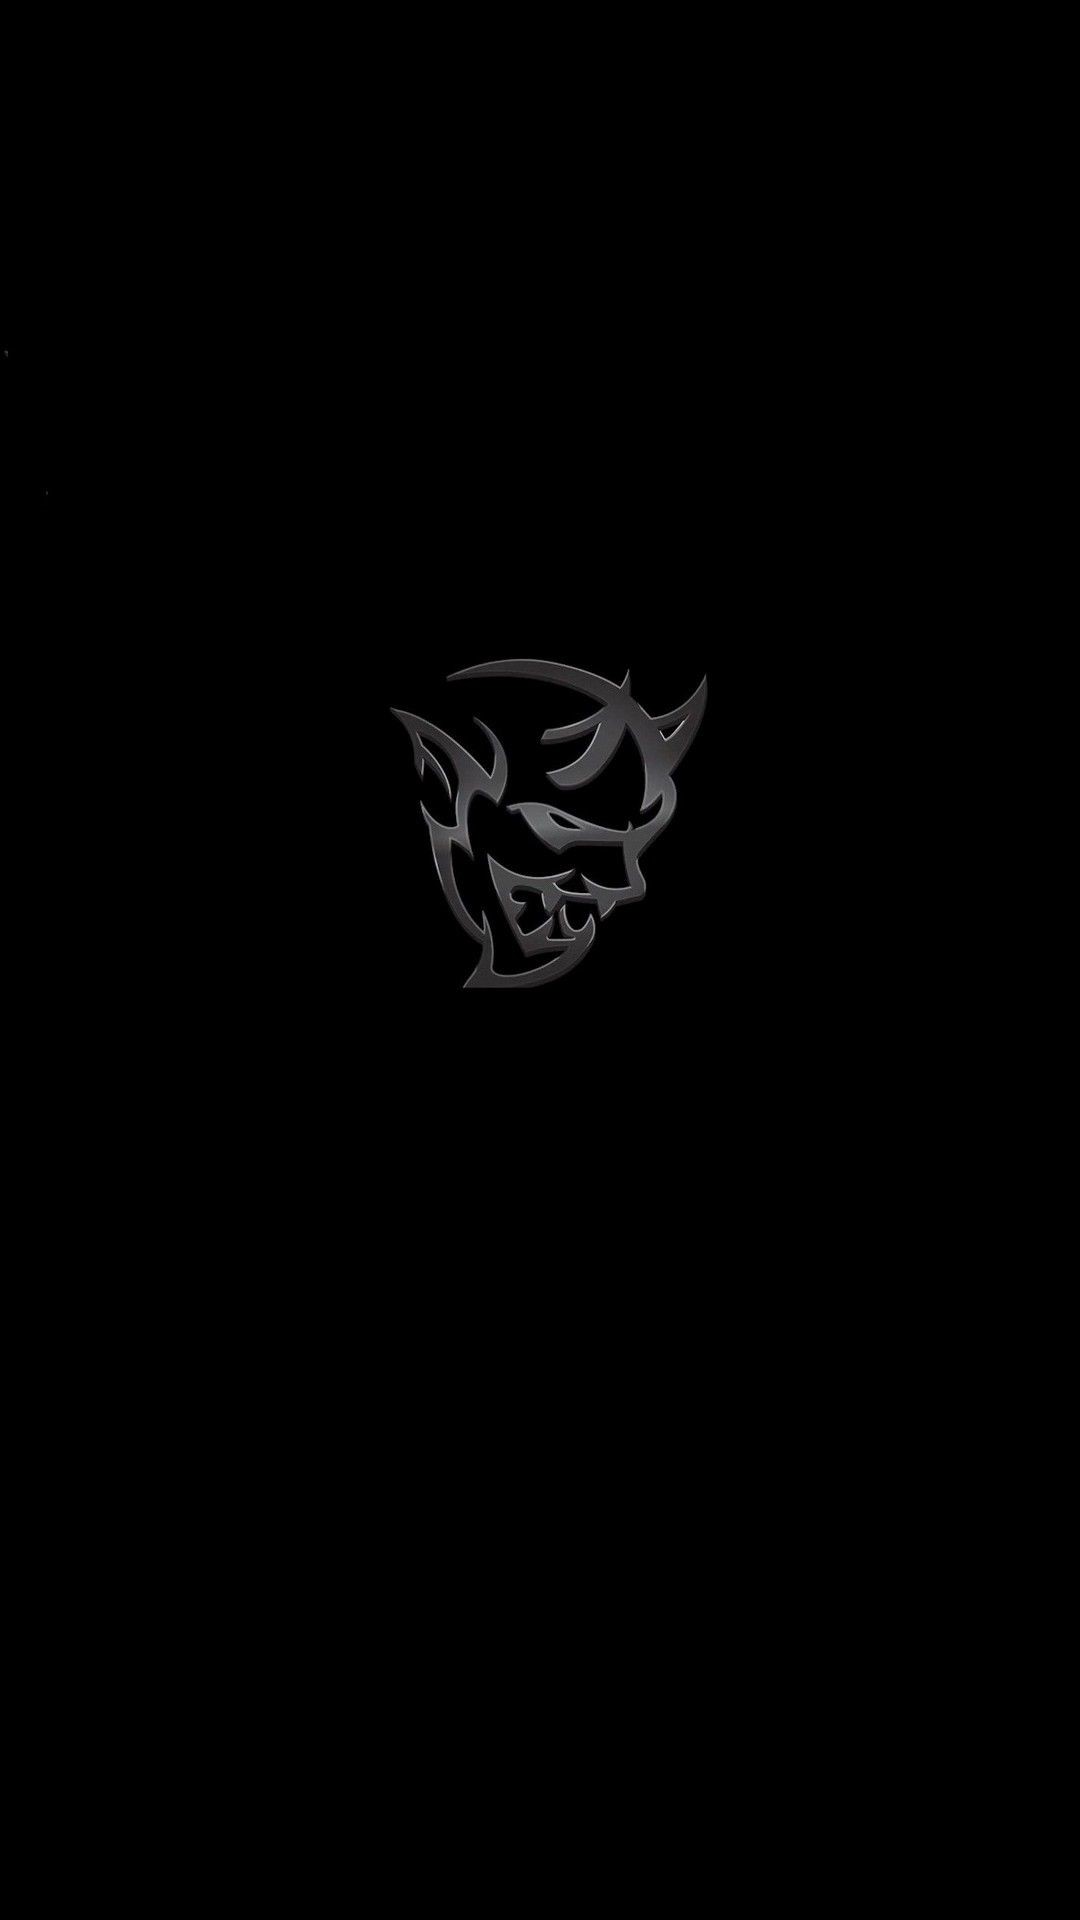 1080x1920 Android Wallpaper Dodge Demon Logo - Best Android Wallpapers